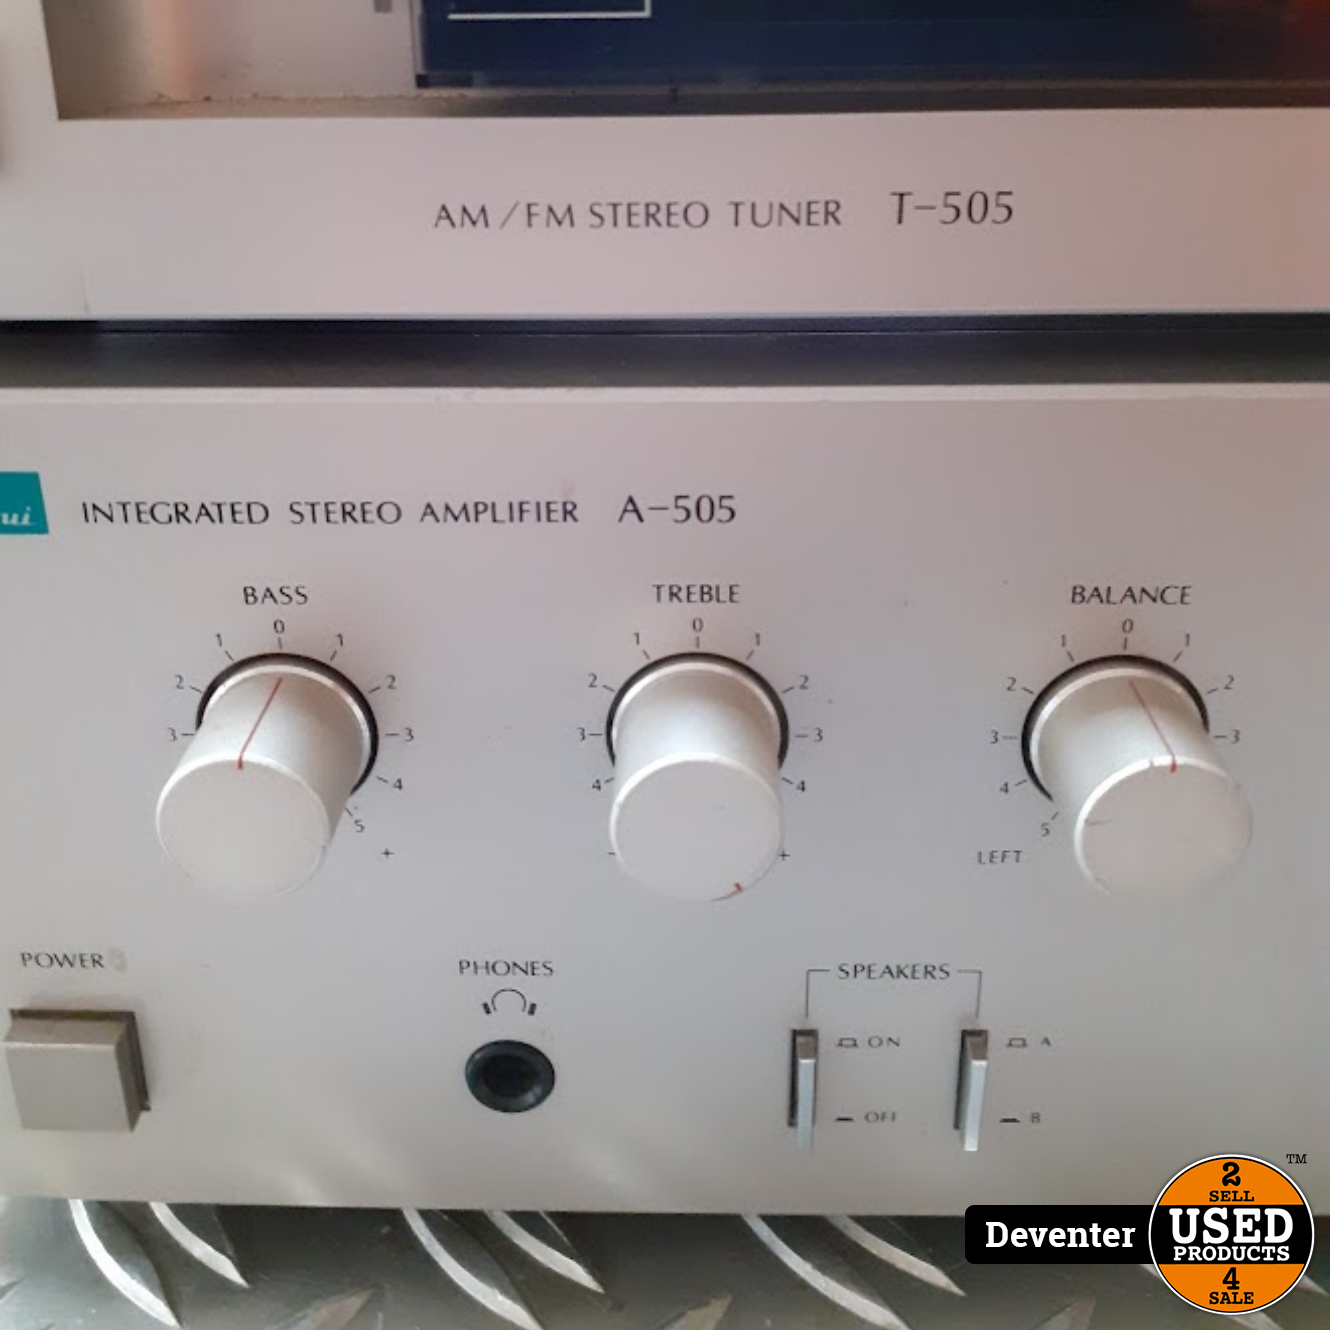 Knop dutje Armstrong Sansui A 505 Stereo Versterker en T 505 AM/FM Stereo Tuner - Used Products  Deventer